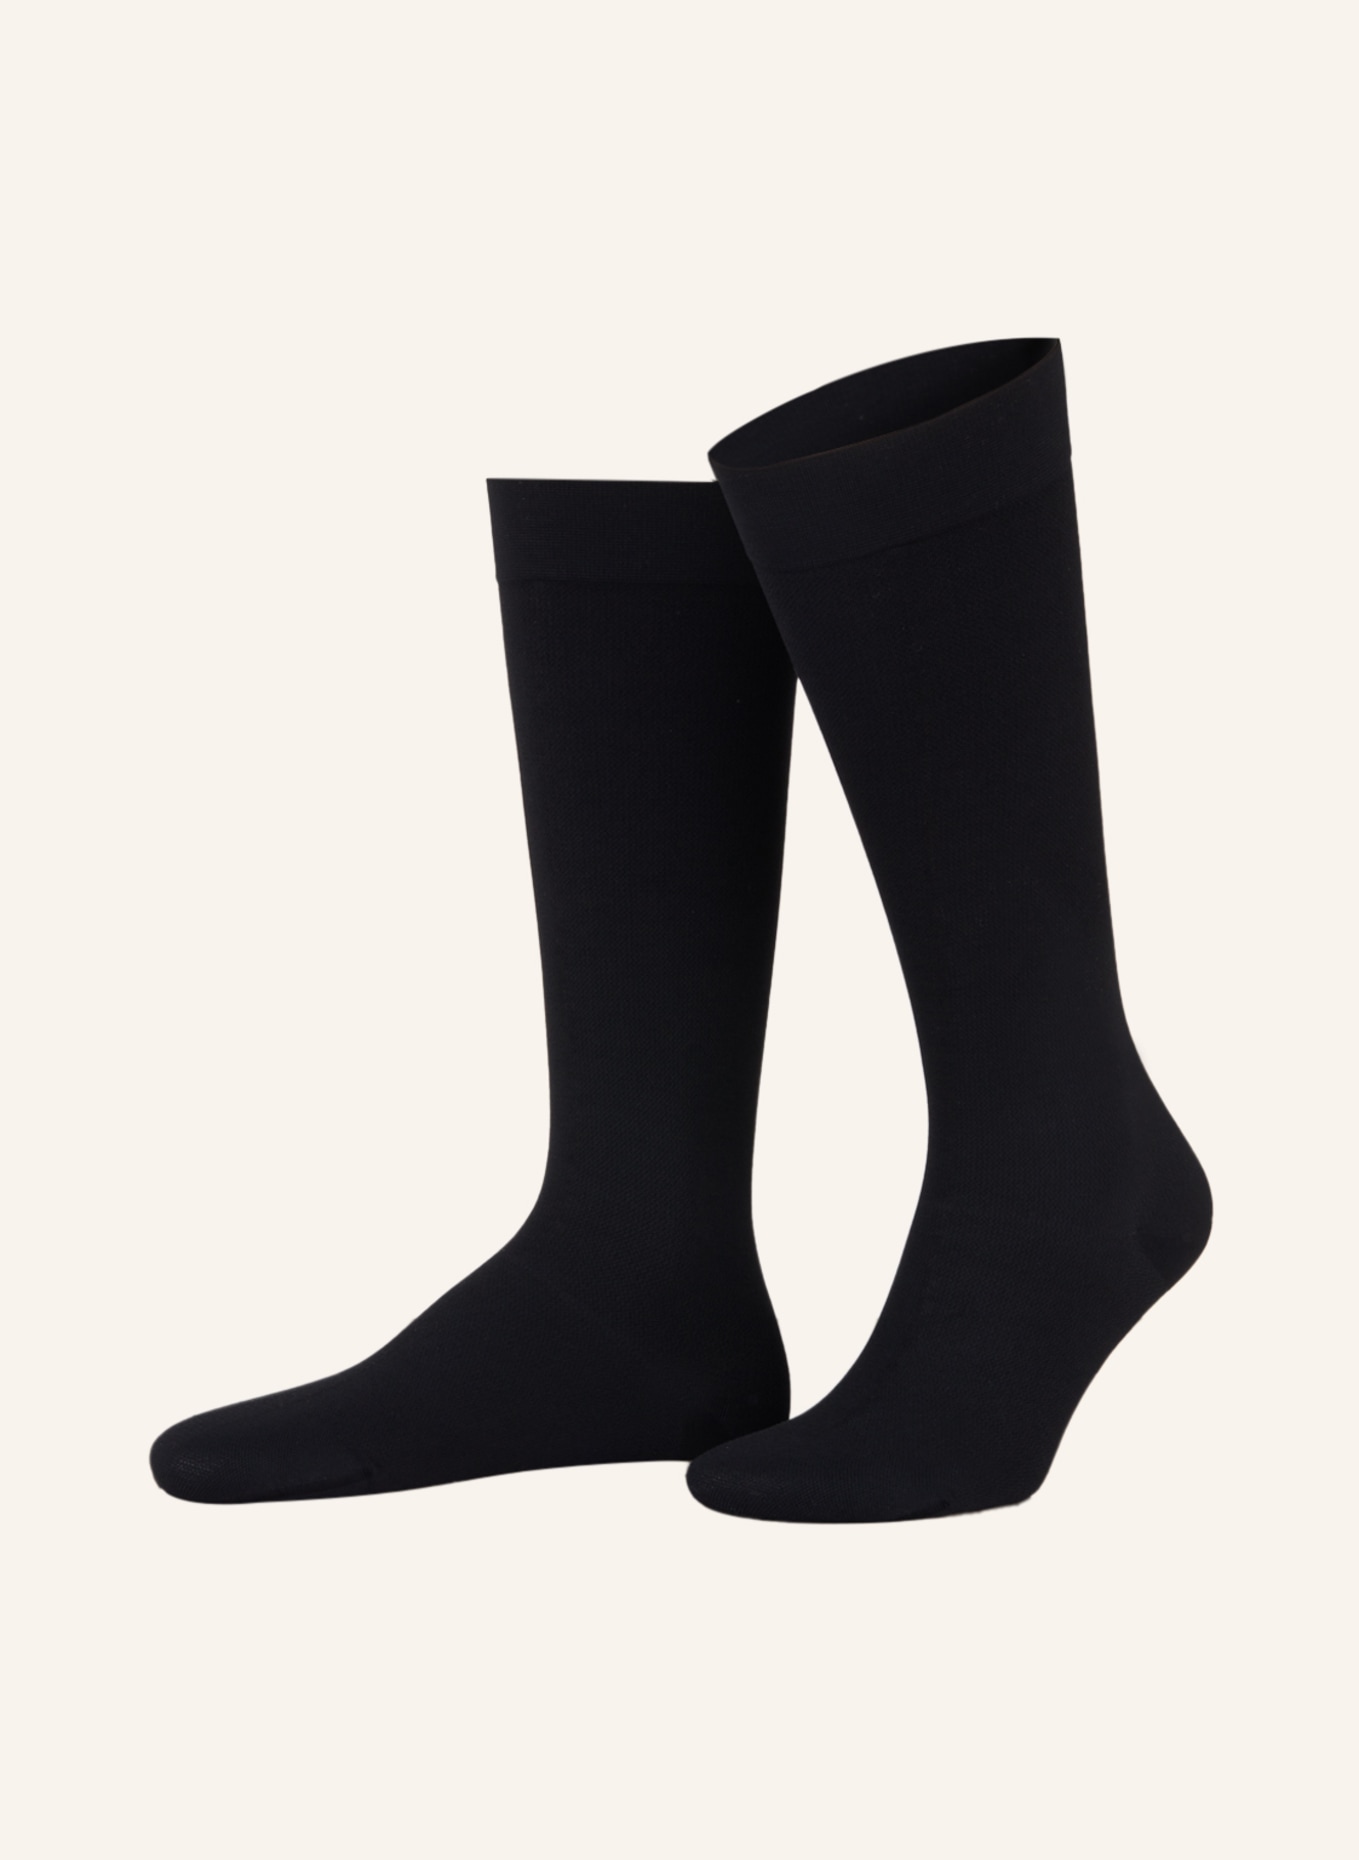 ITEM m6 Fine knee high stockings COSY WINTER 100 CONSCIOUS, Color: 301 Black (Image 1)